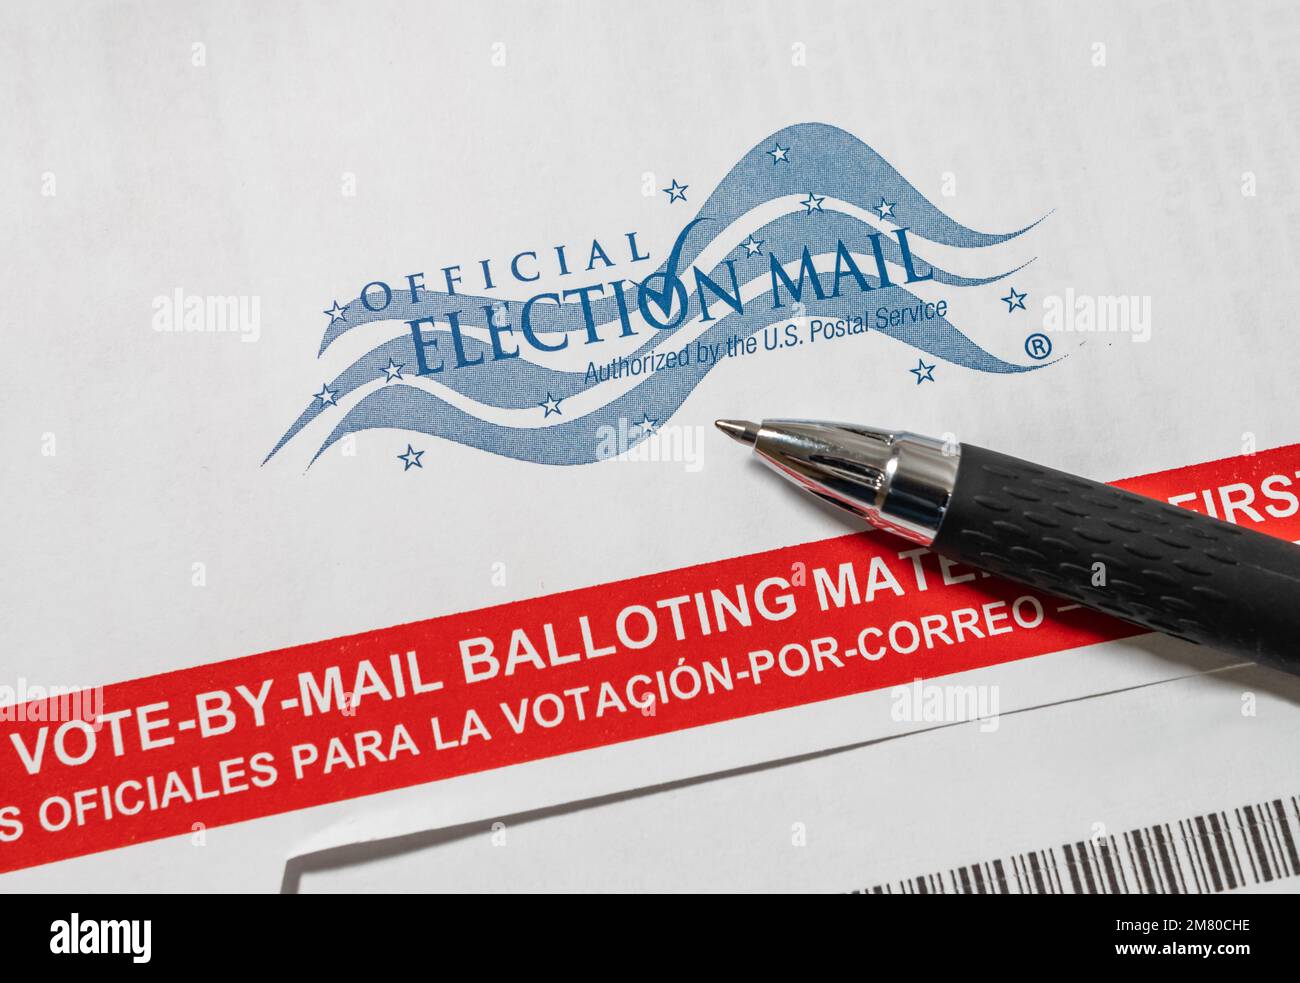 Official Election Mail vote by mail absentee voter balloting materials. Stock Photo